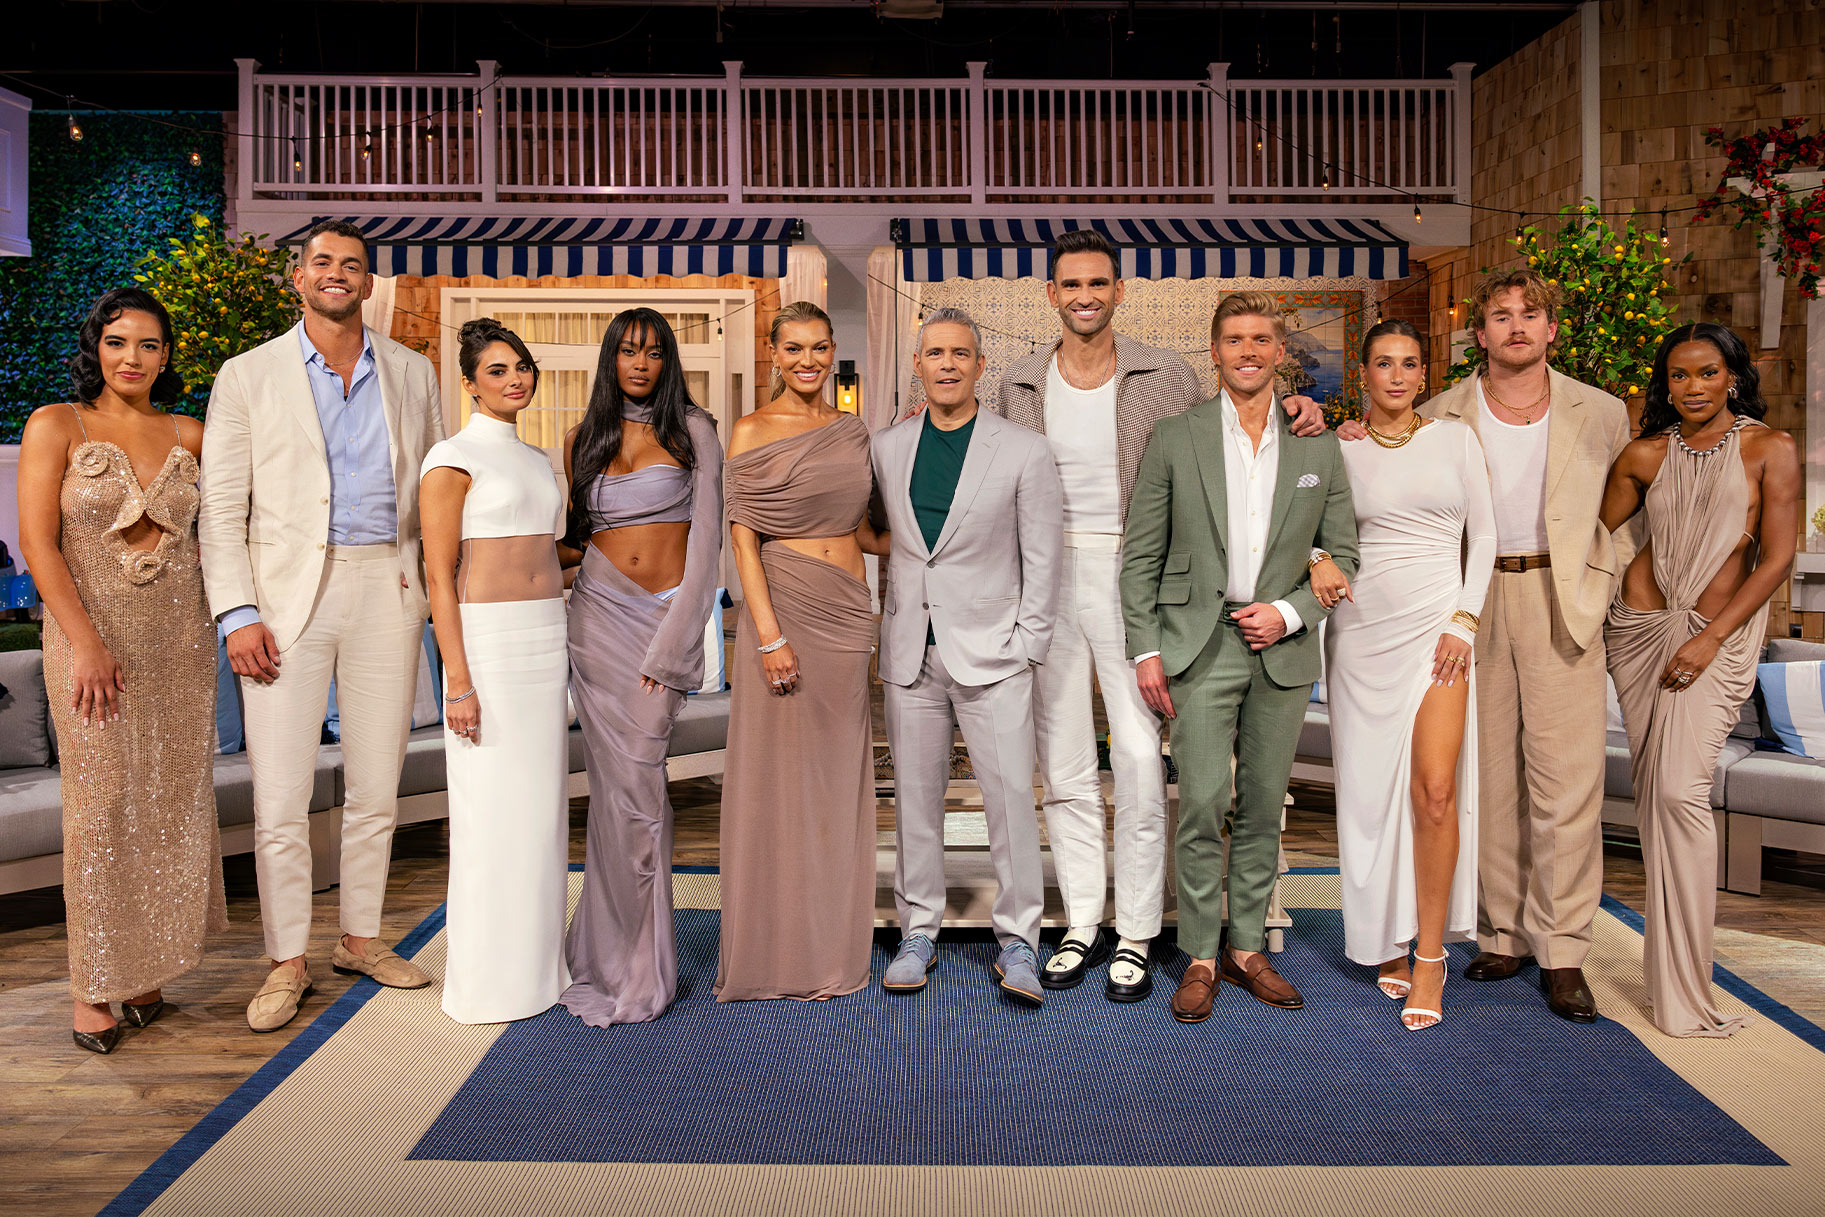 Andy Cohen and the Summer House cast posing together in front of a themed set.